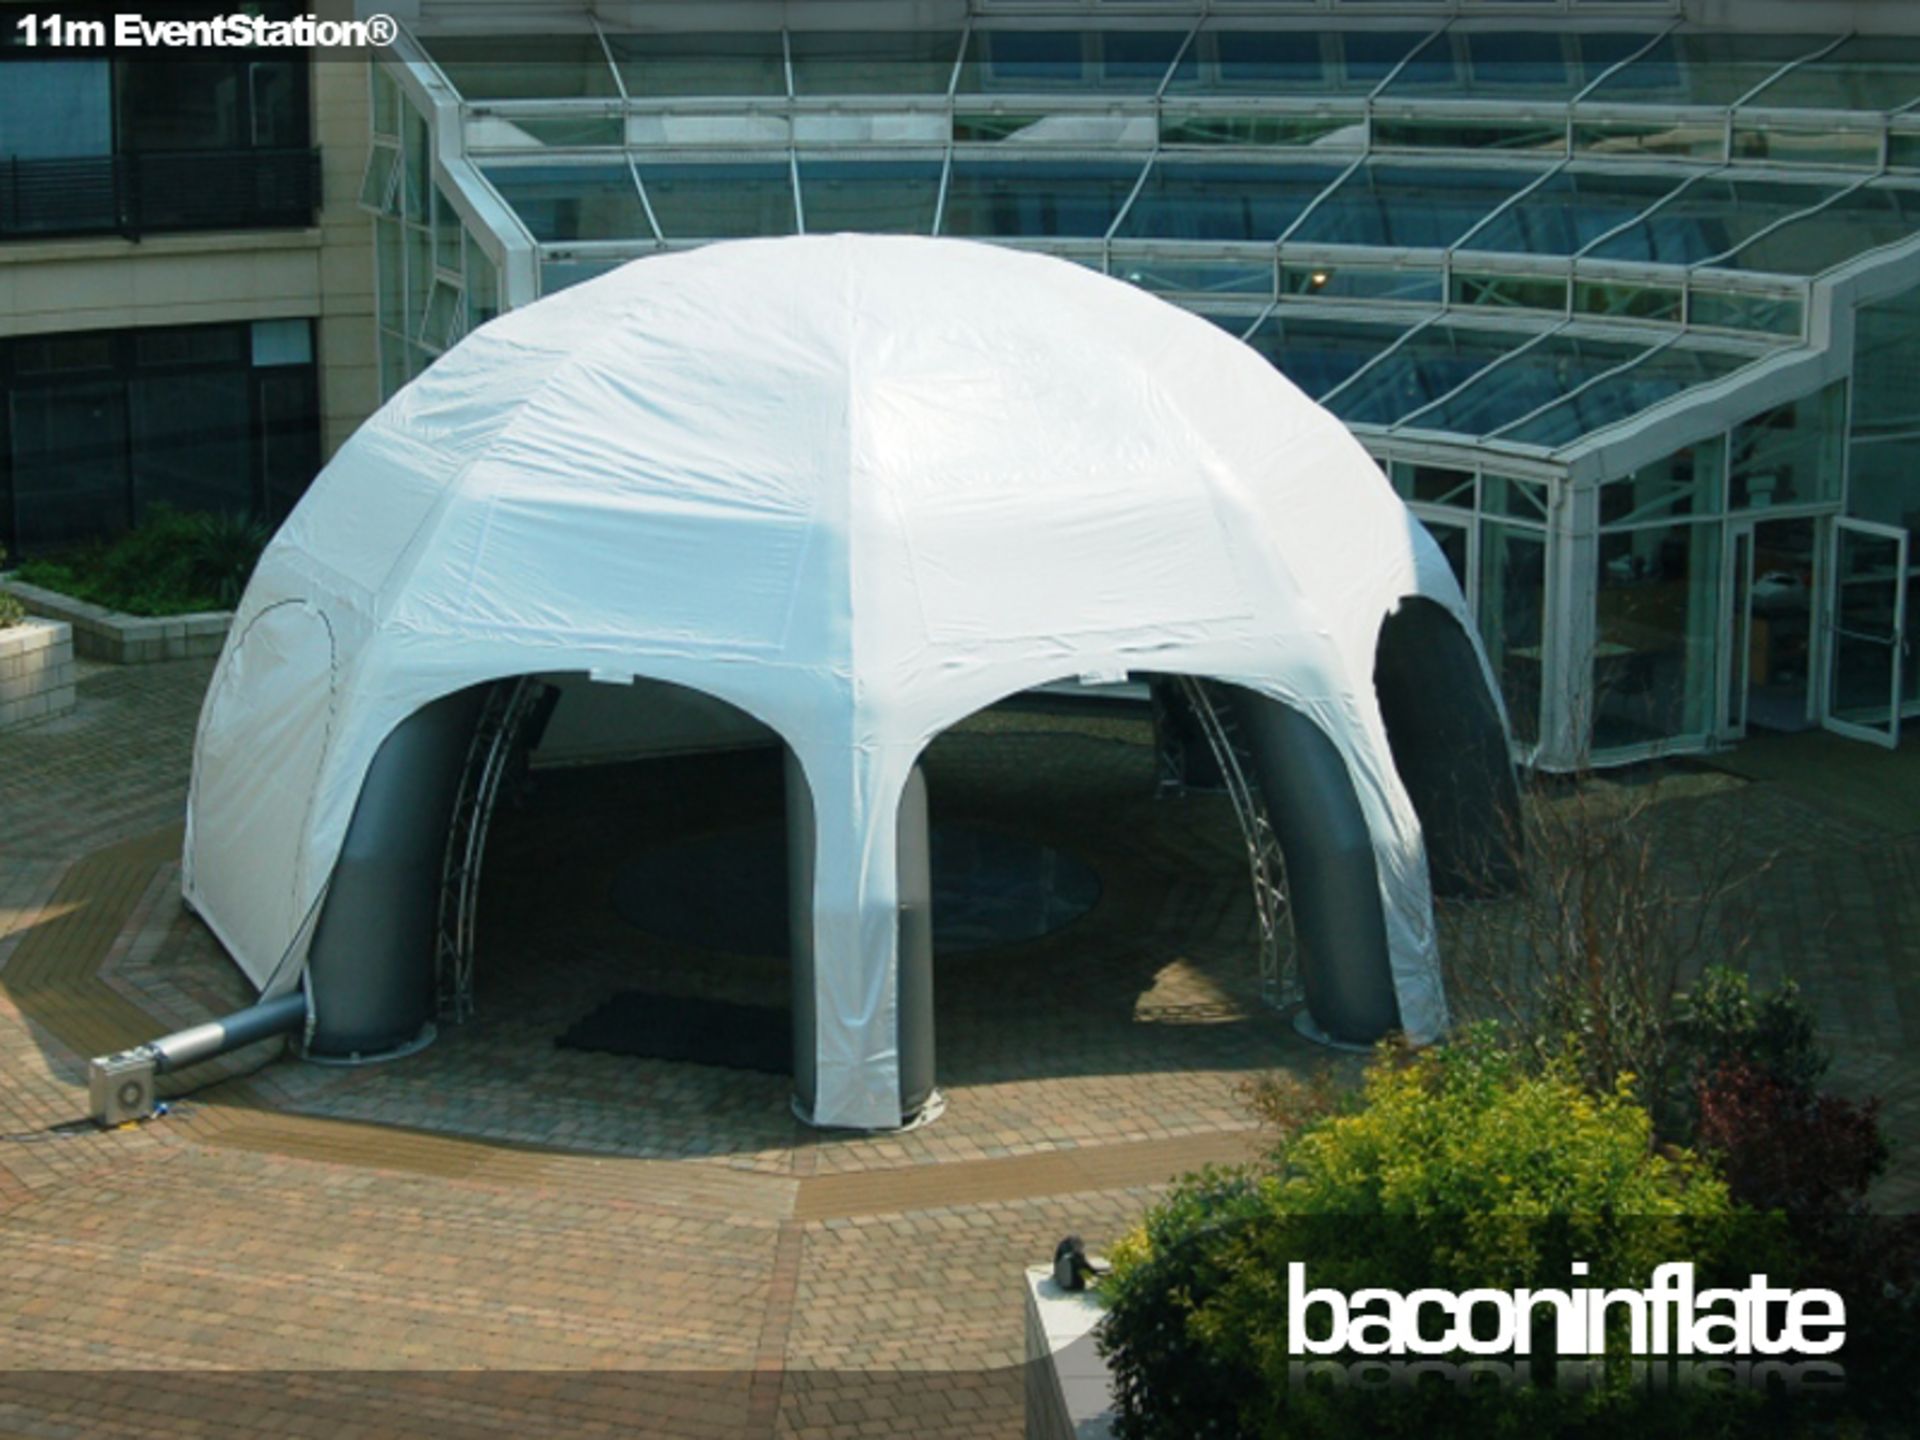 11m EventStation Leg Unit Inflatable Structure with Canopy (2 Bags) (Stock No’s; BiES & BiES 11/ - Image 2 of 12